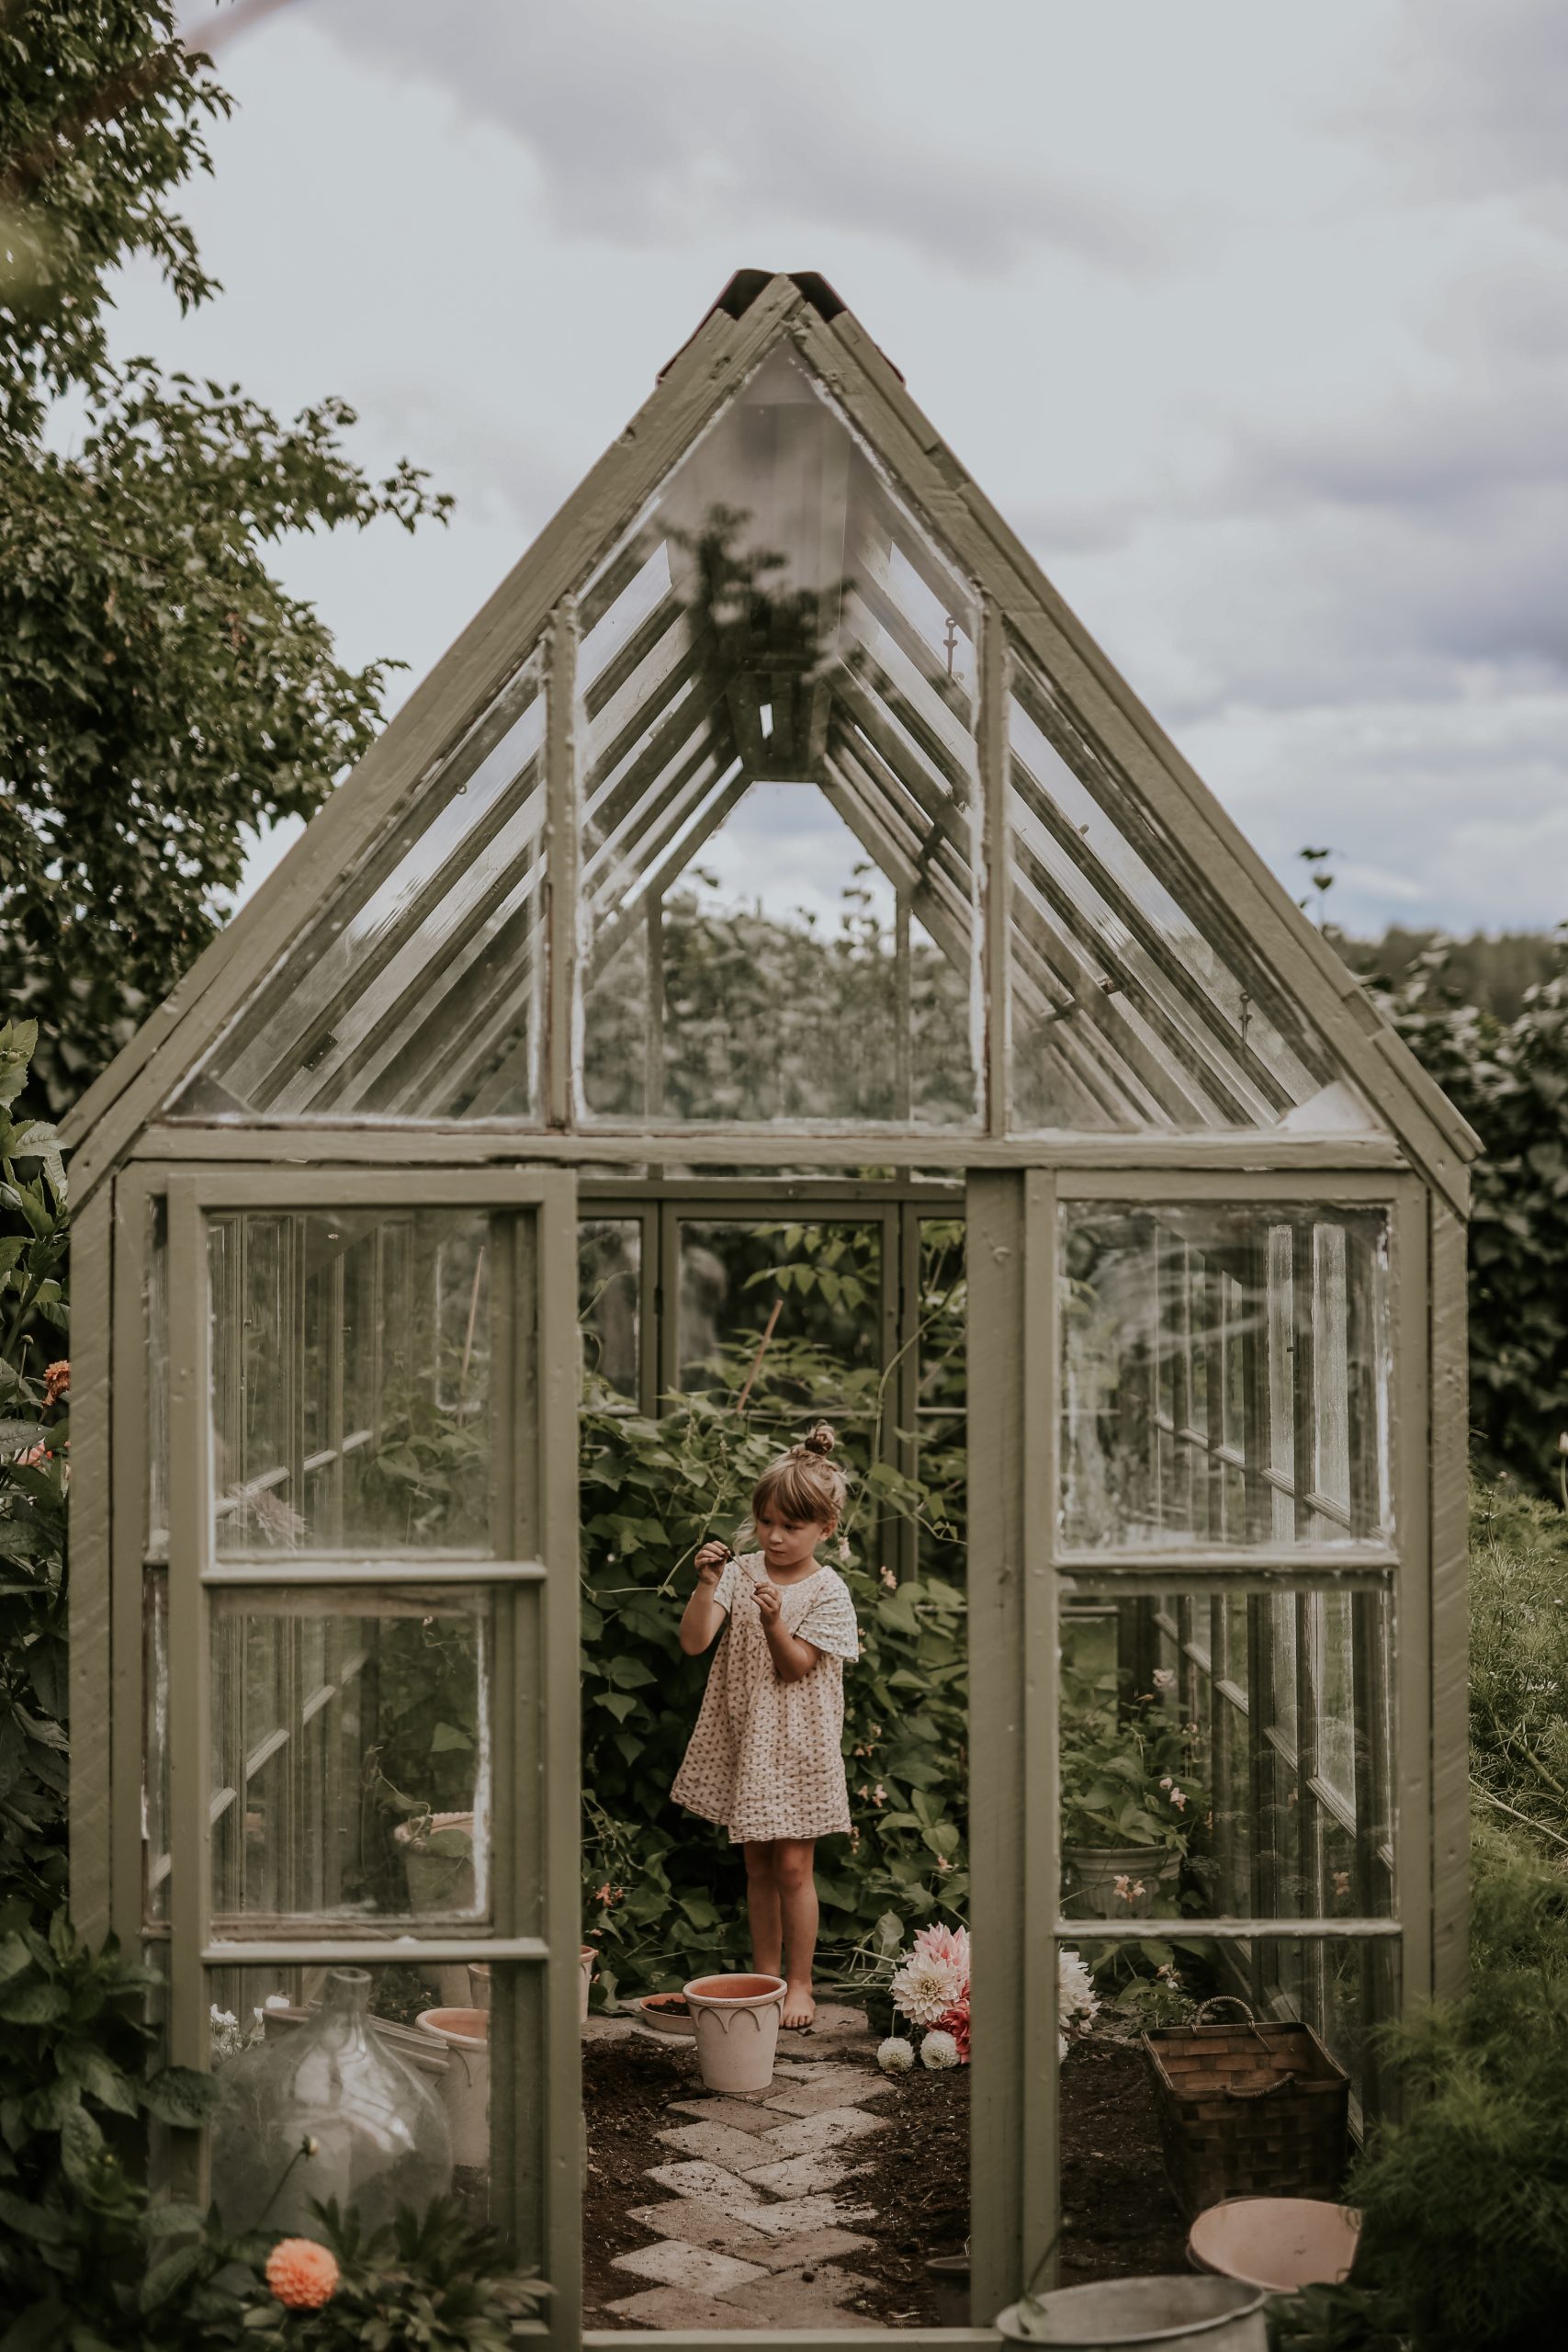 Anna Kubel's children's greenhouse in the family’s garden. The girl Bianca, is playing with seeds surrounded by terraccotta pots by Bergs Potter. Photo: Anna Kubel.